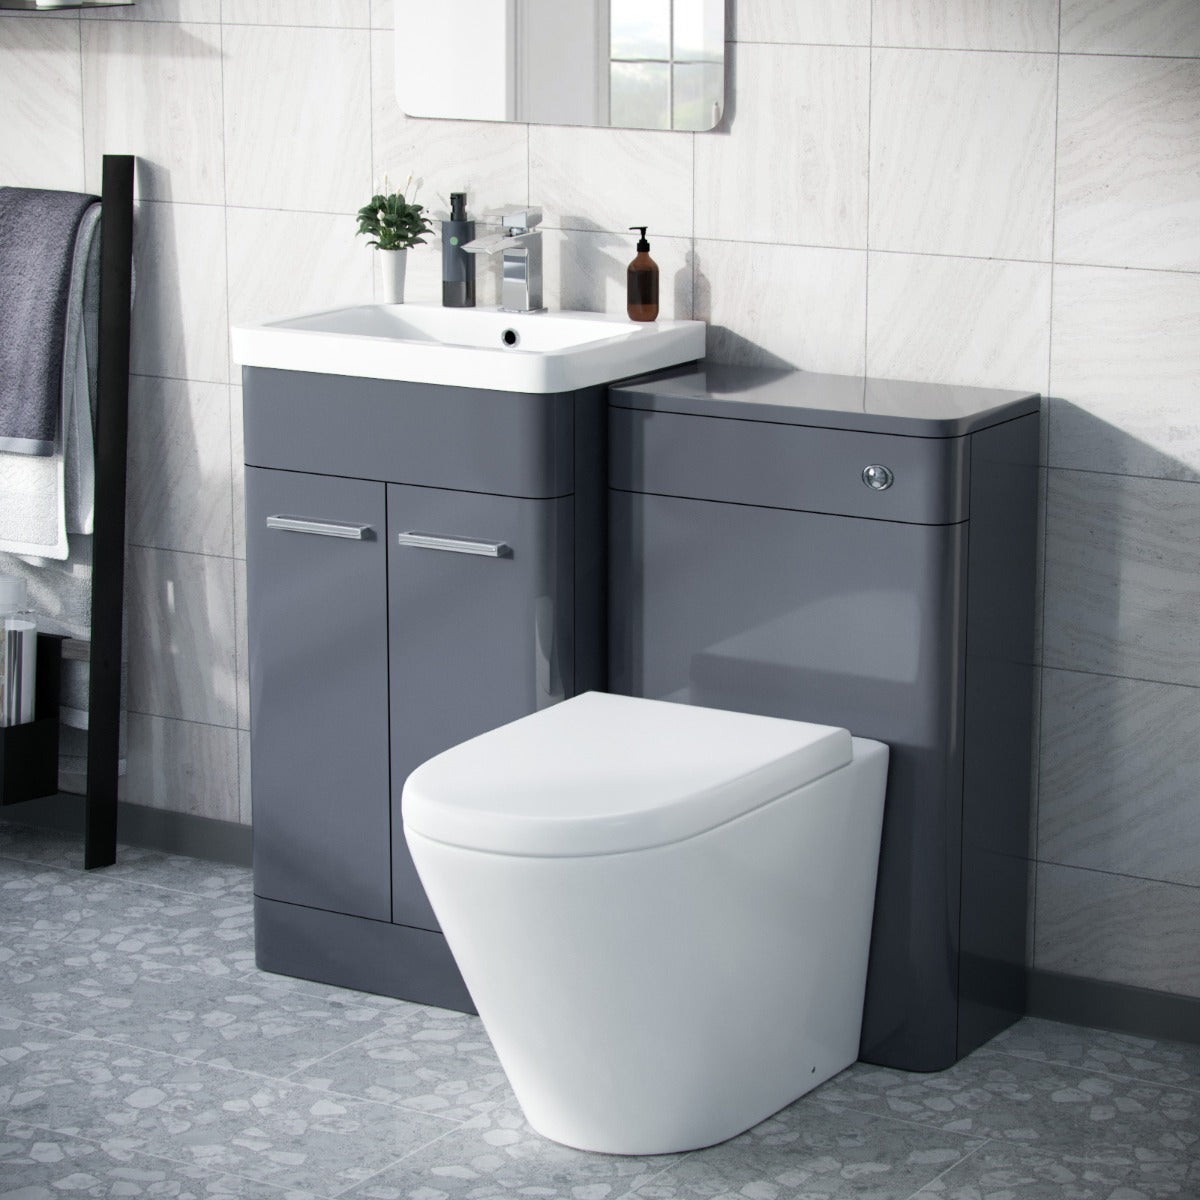 1000mm Steel Grey Vanity Cabinet with WC Unit And Round Rimless BTW Toilet Amie